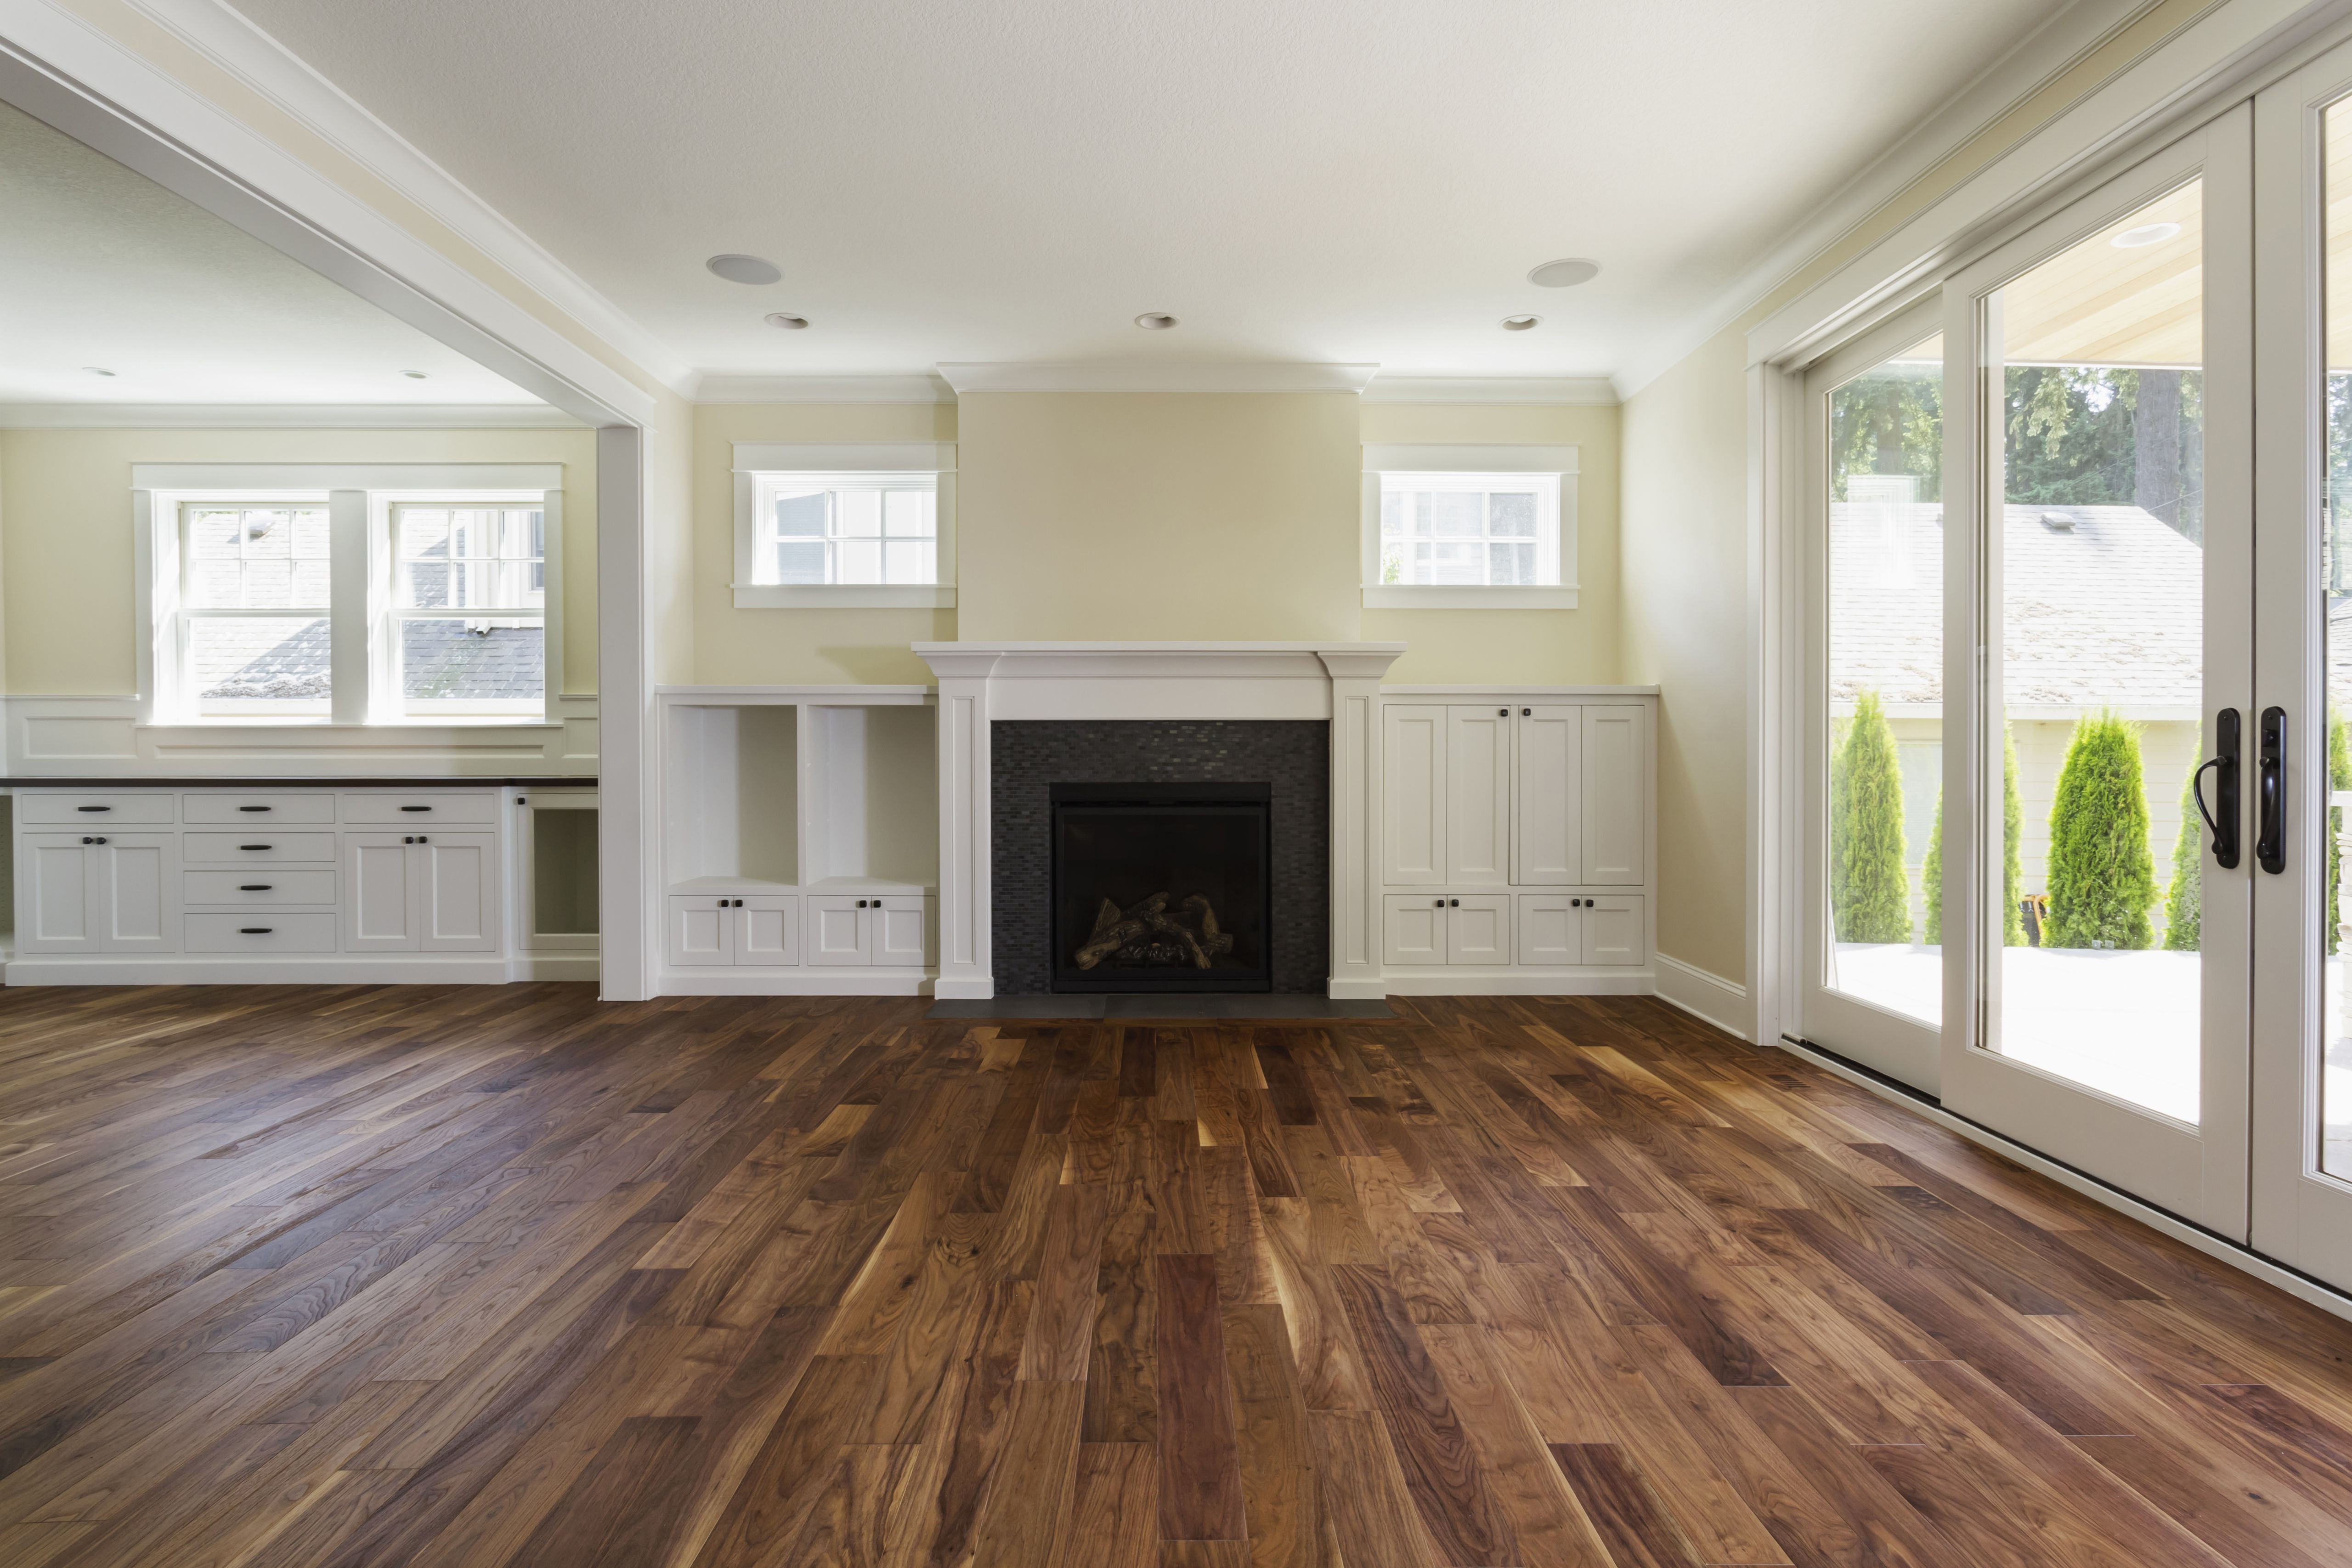 13 Great Types Of Laminate Hardwood Floors 2024 free download types of laminate hardwood floors of the pros and cons of prefinished hardwood flooring with regard to fireplace and built in shelves in living room 482143011 57bef8e33df78cc16e035397